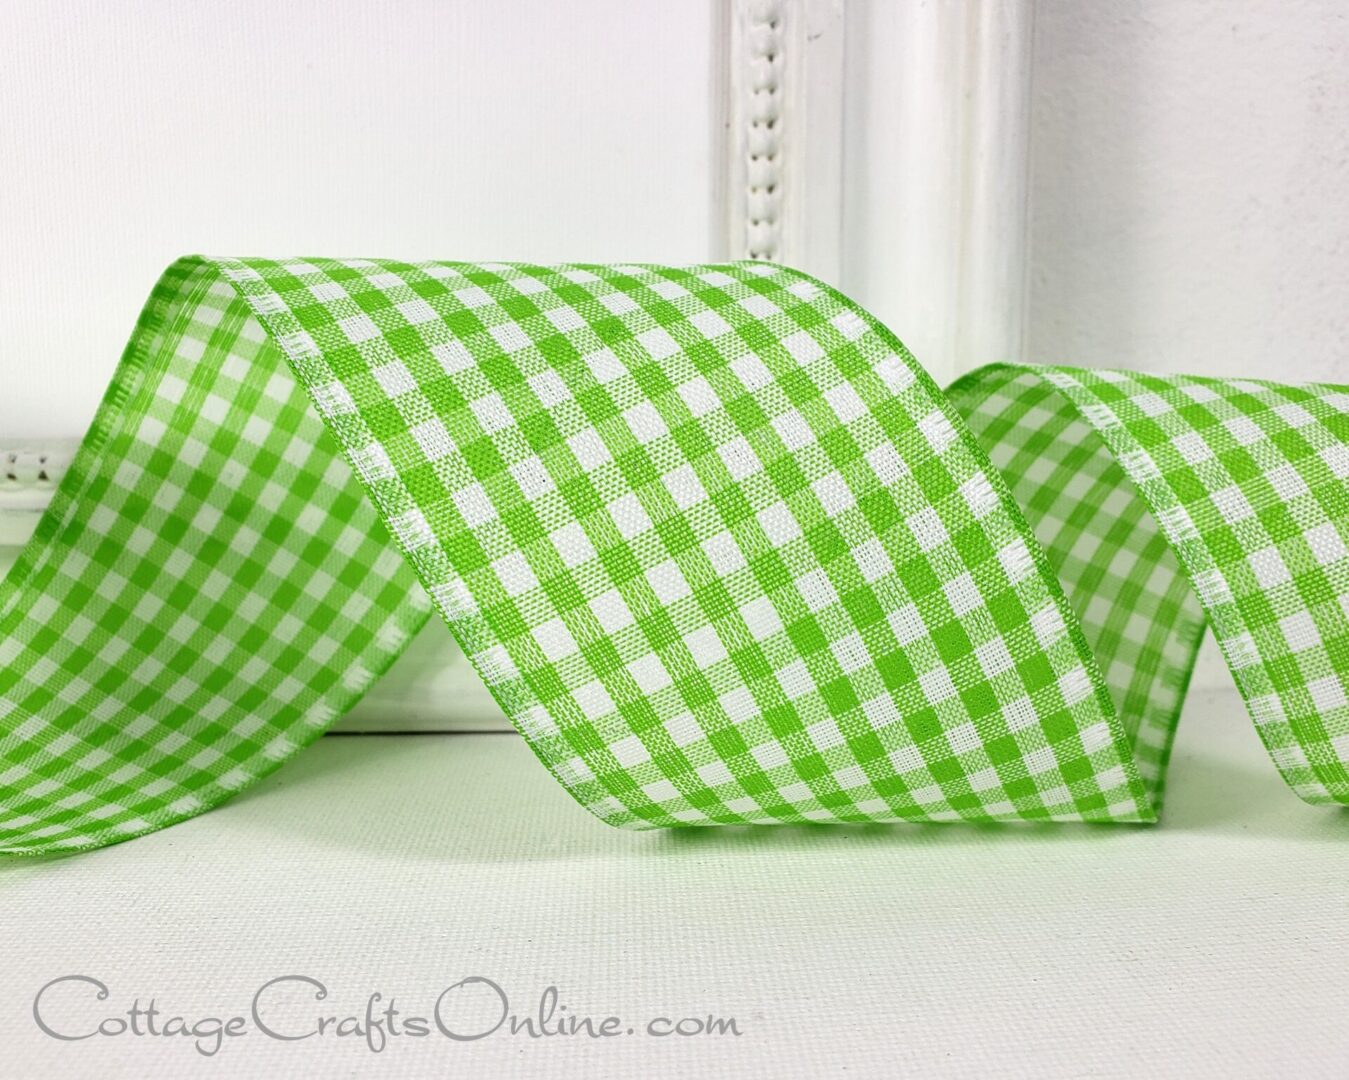 Grass green and white gingham check 2.5" wide wired ribbon from the Etsy shop of Cottage Crafts Online.